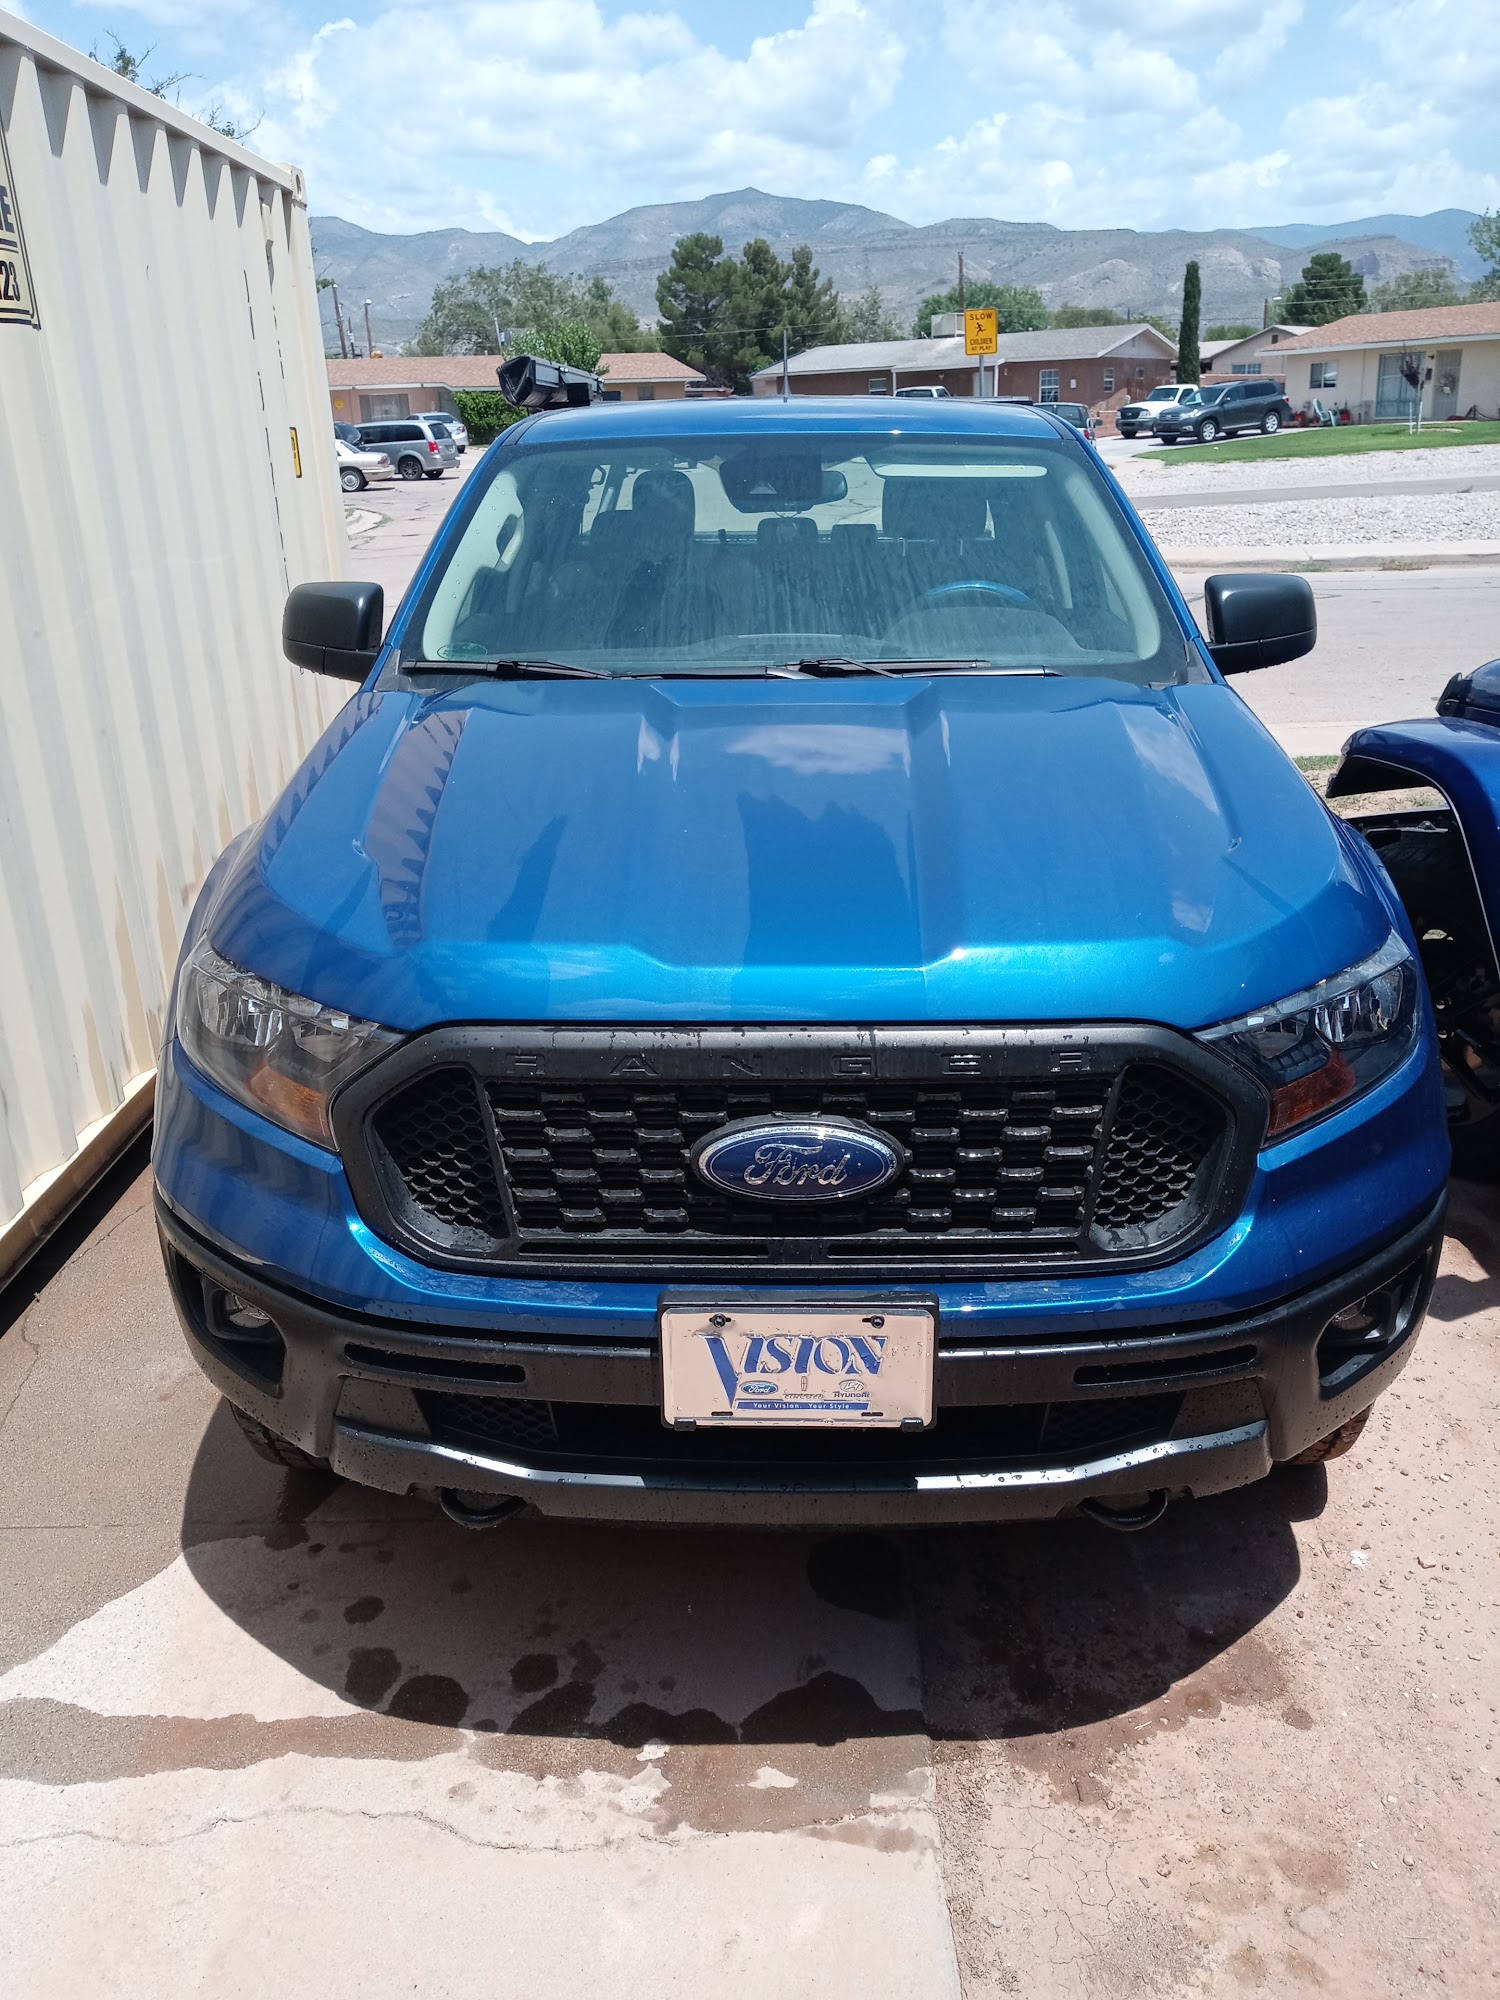 Vision Ford Service